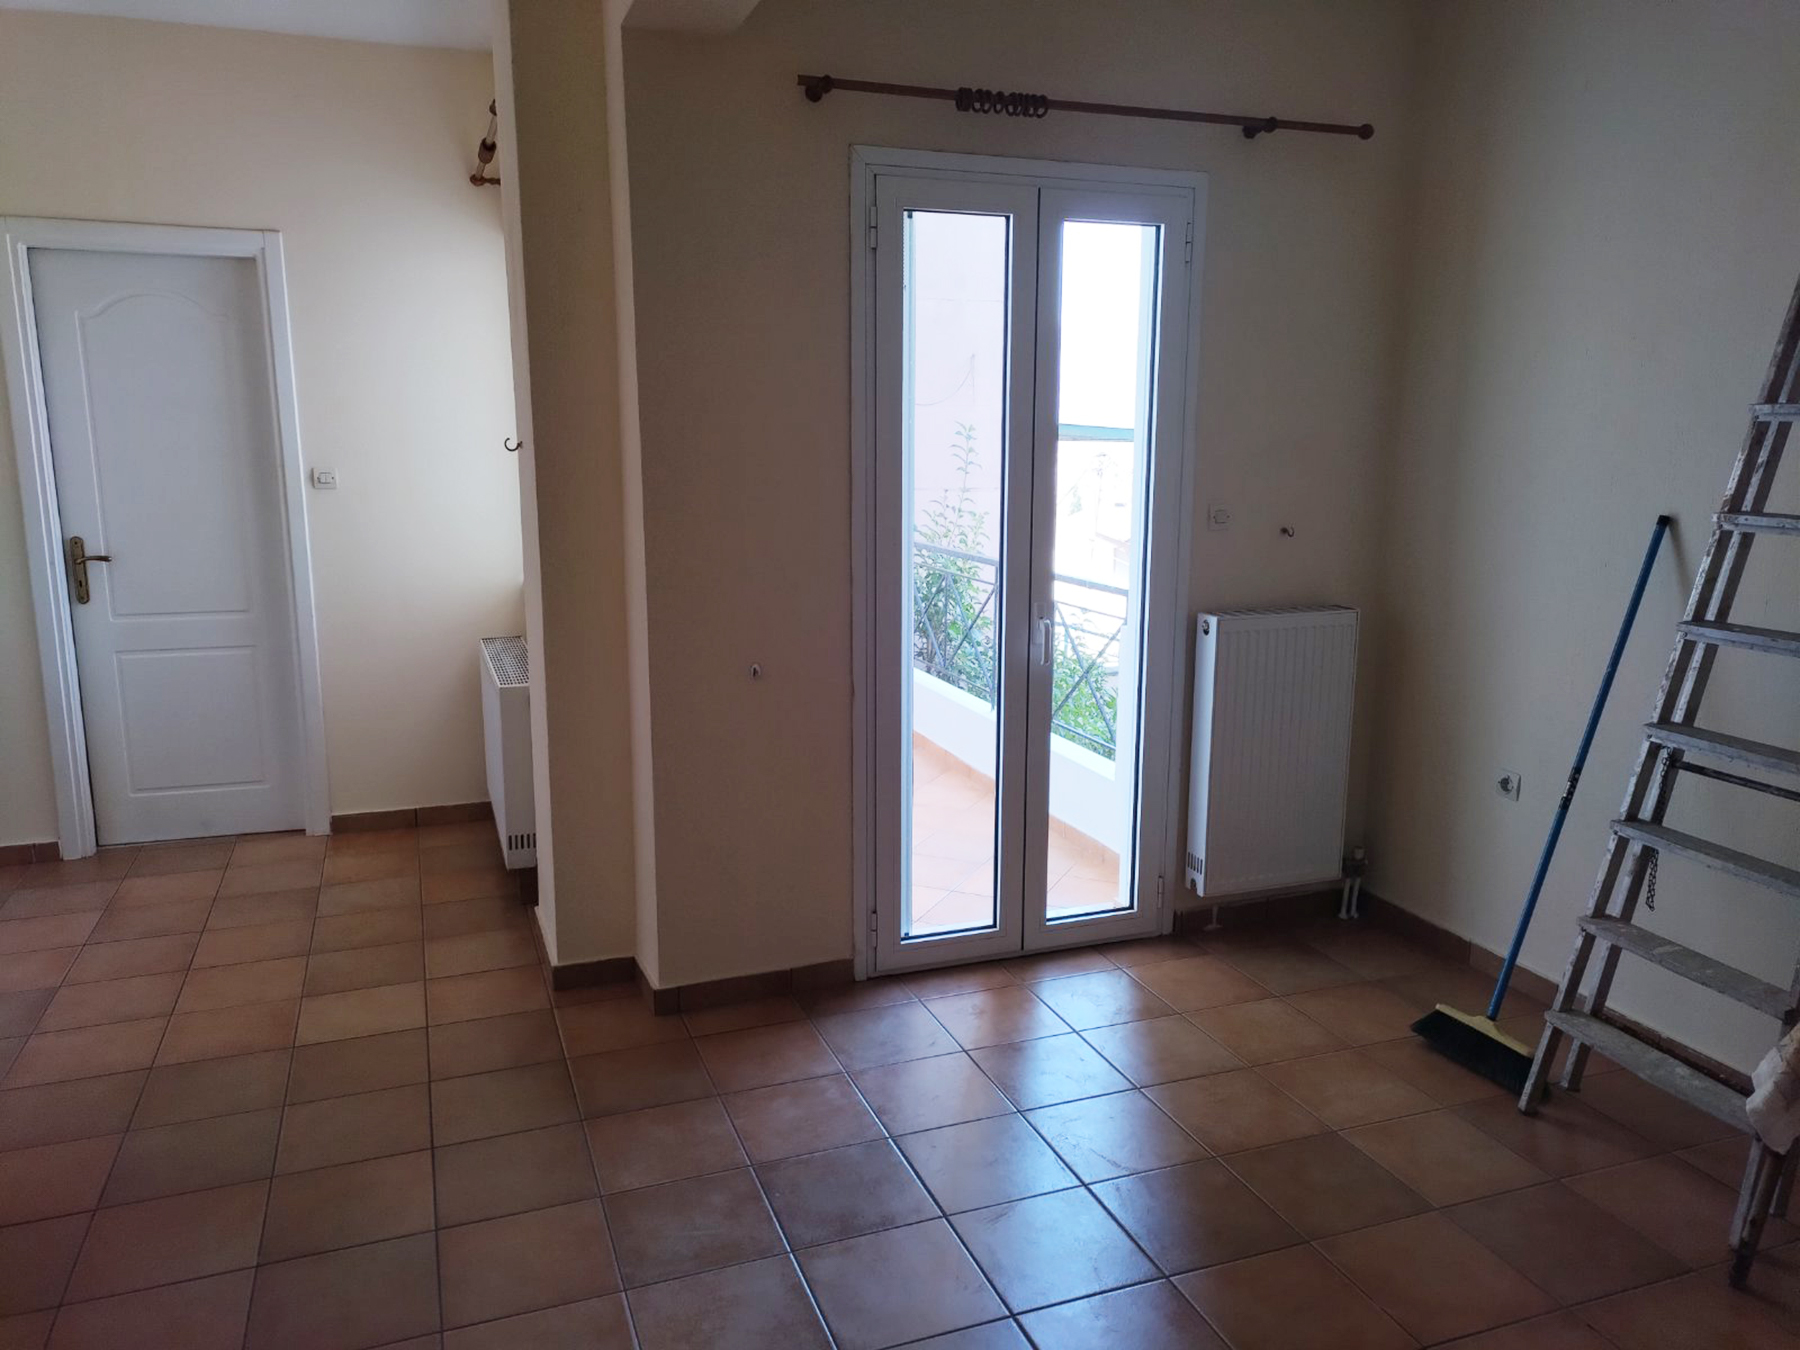 Studio for rent 32 sq.m. 1st floor with a view near Alexander the Great in Ioannina